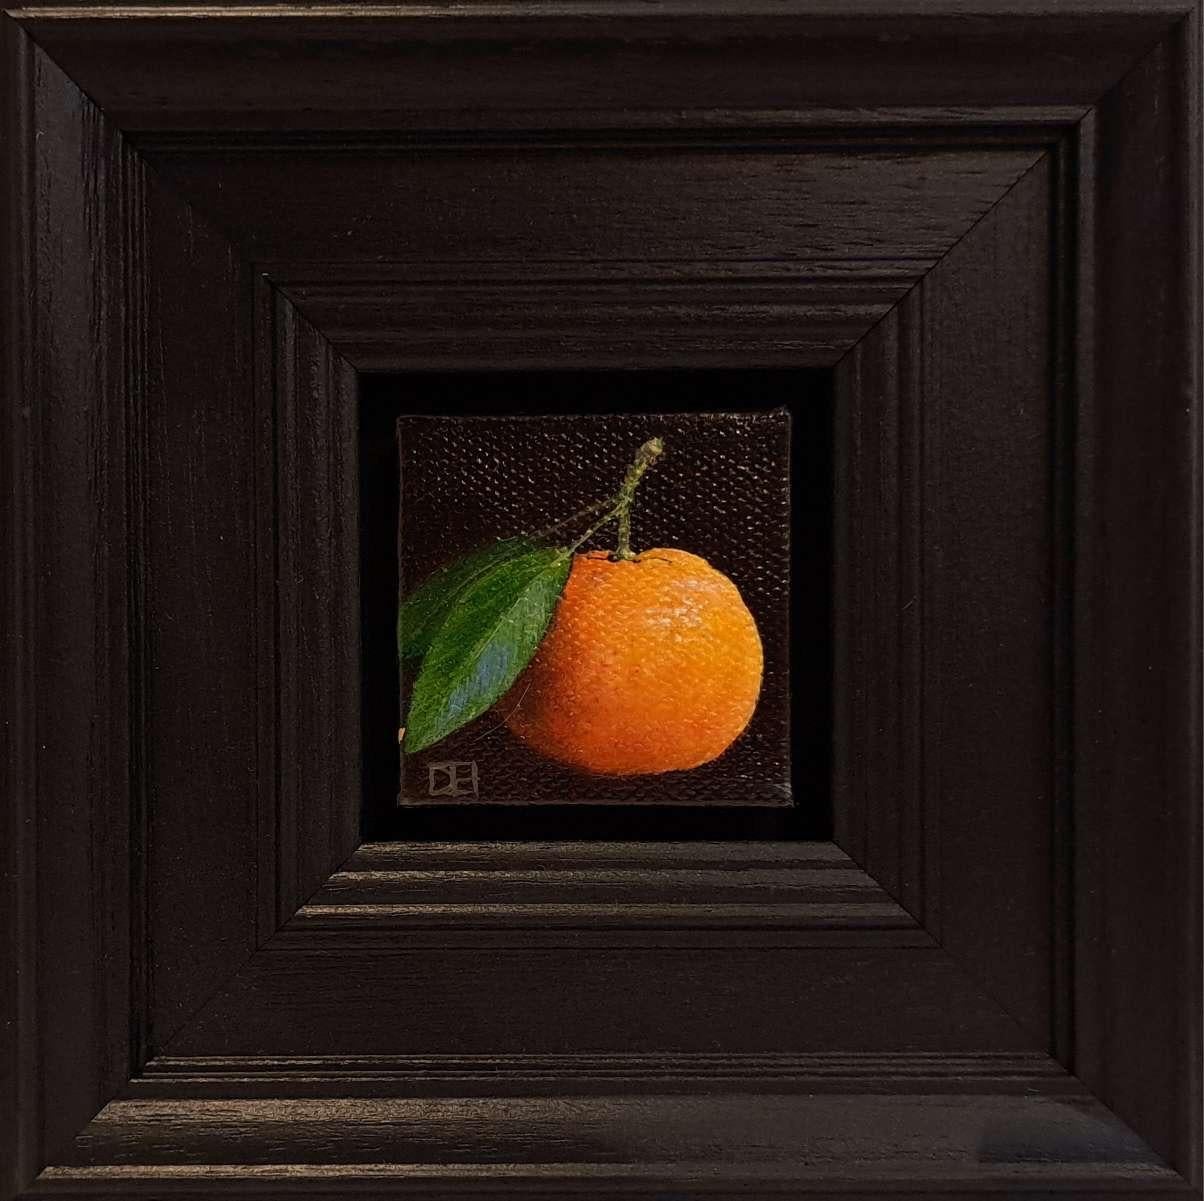 Pocket Crimson Strawberry is an original oil painting by Dani Humberstone as part of her Pocket Painting series featuring small scale realistic oil paintings, with a nod to baroque still life painting. The painting are set in a black wood layered